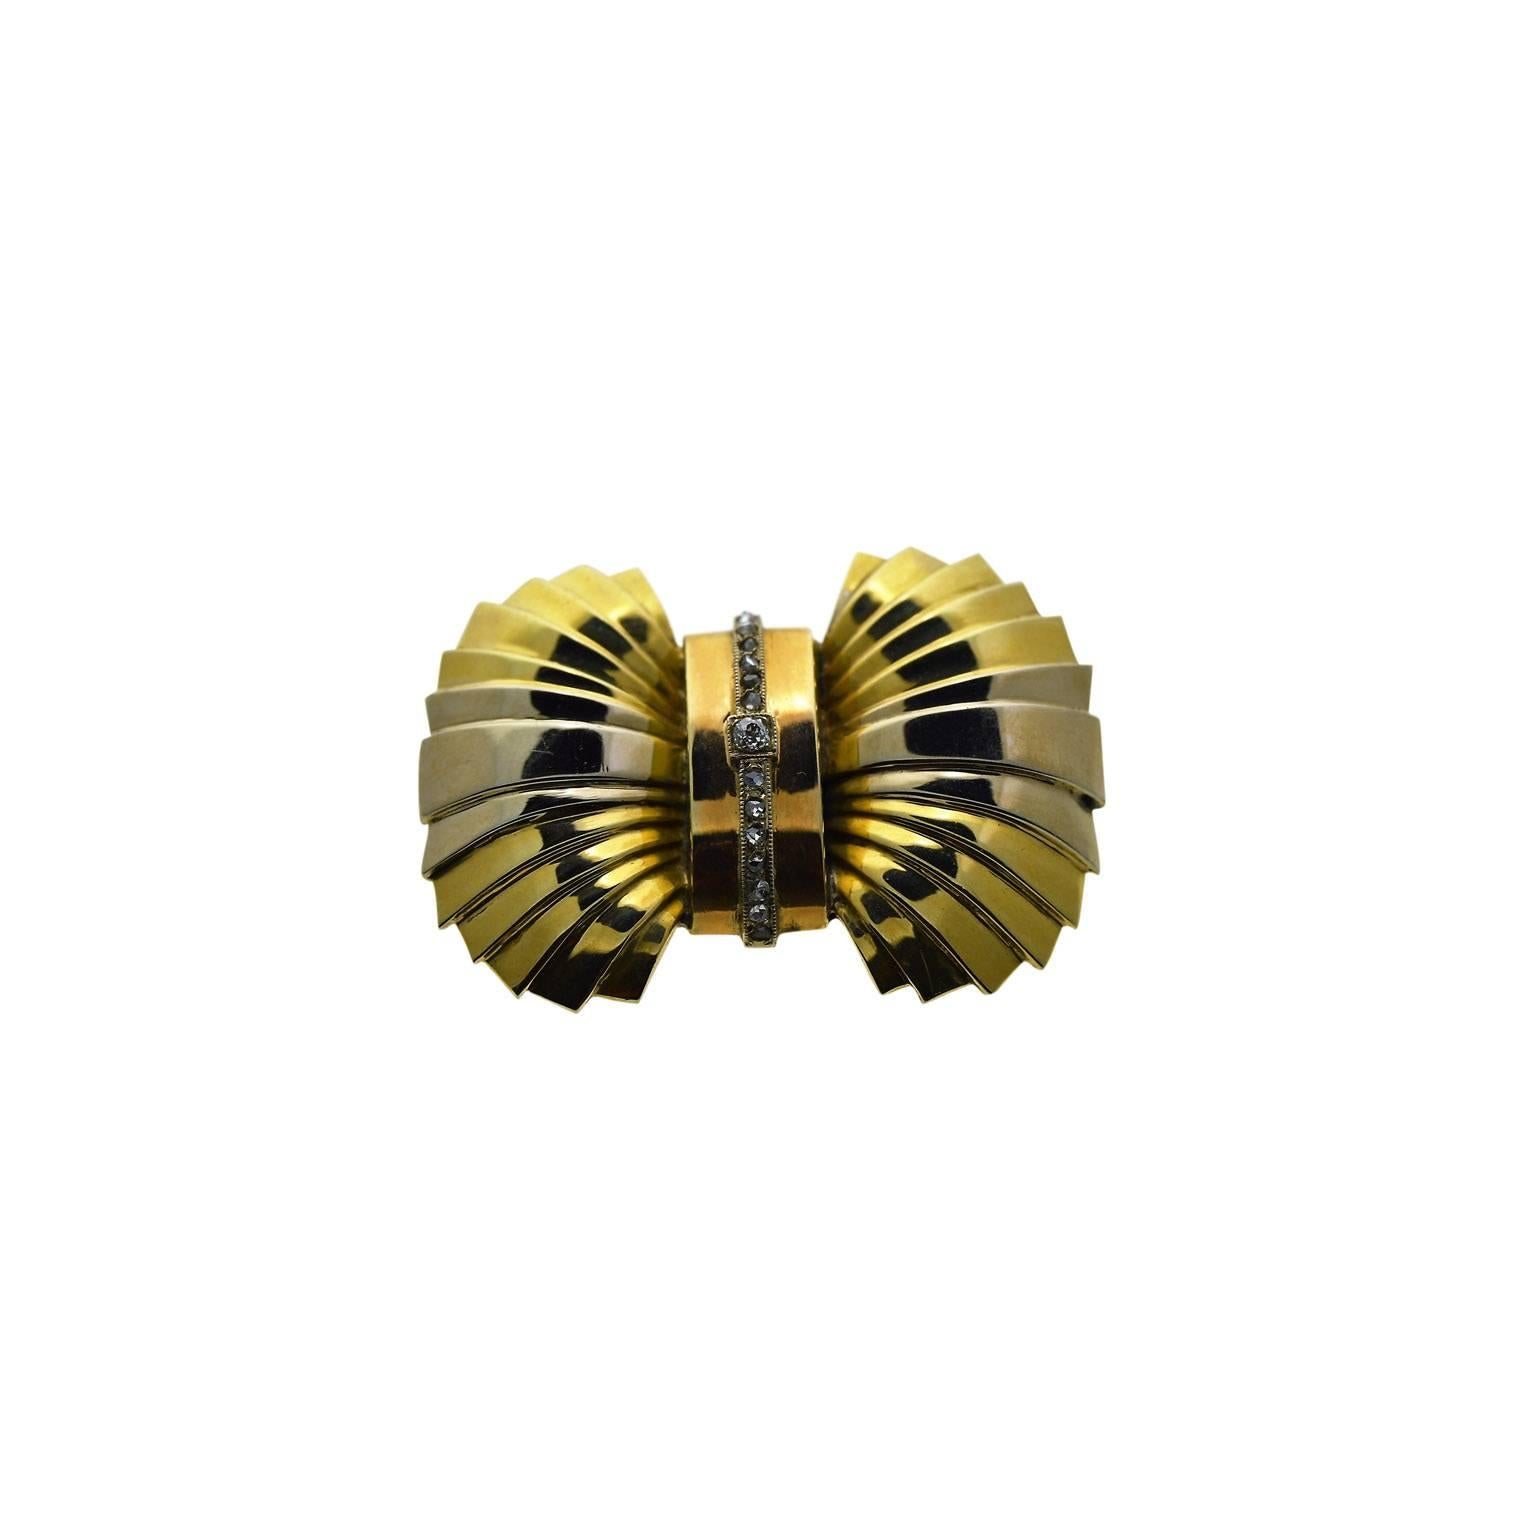 This sophisticated little pin appears to be French by design.
It is done in yellow, rose and white gold and entirely hand constructed.
It is 35mm in length and 26mm in width. 
Uniquely, this pin can be worn by a man as well as a woman as it is